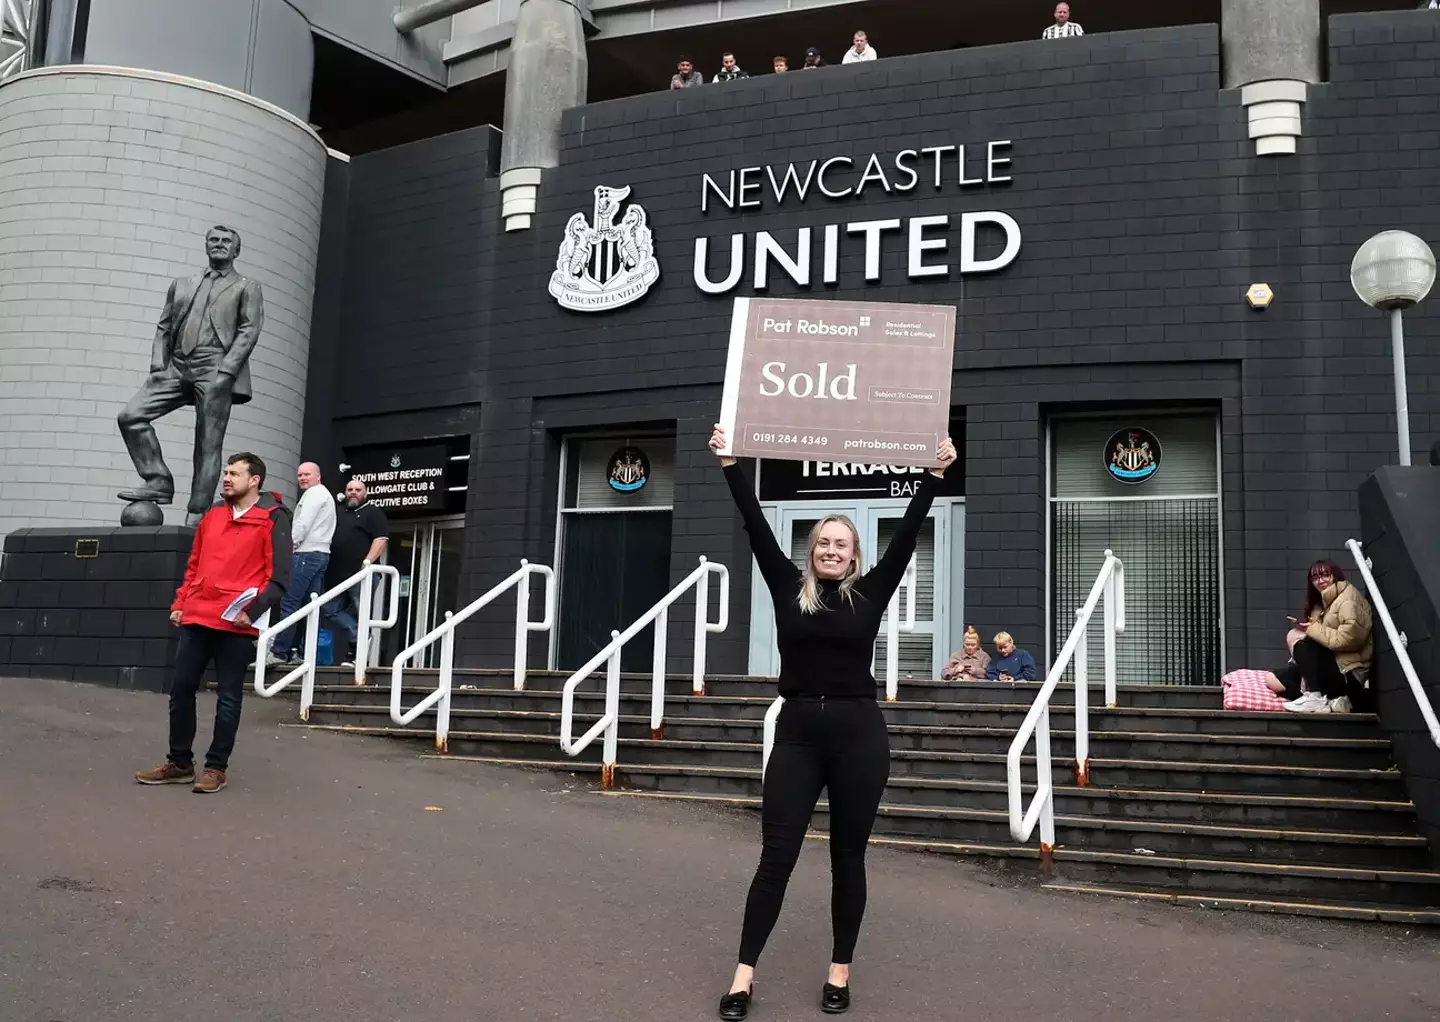 Newcastle United Sold (